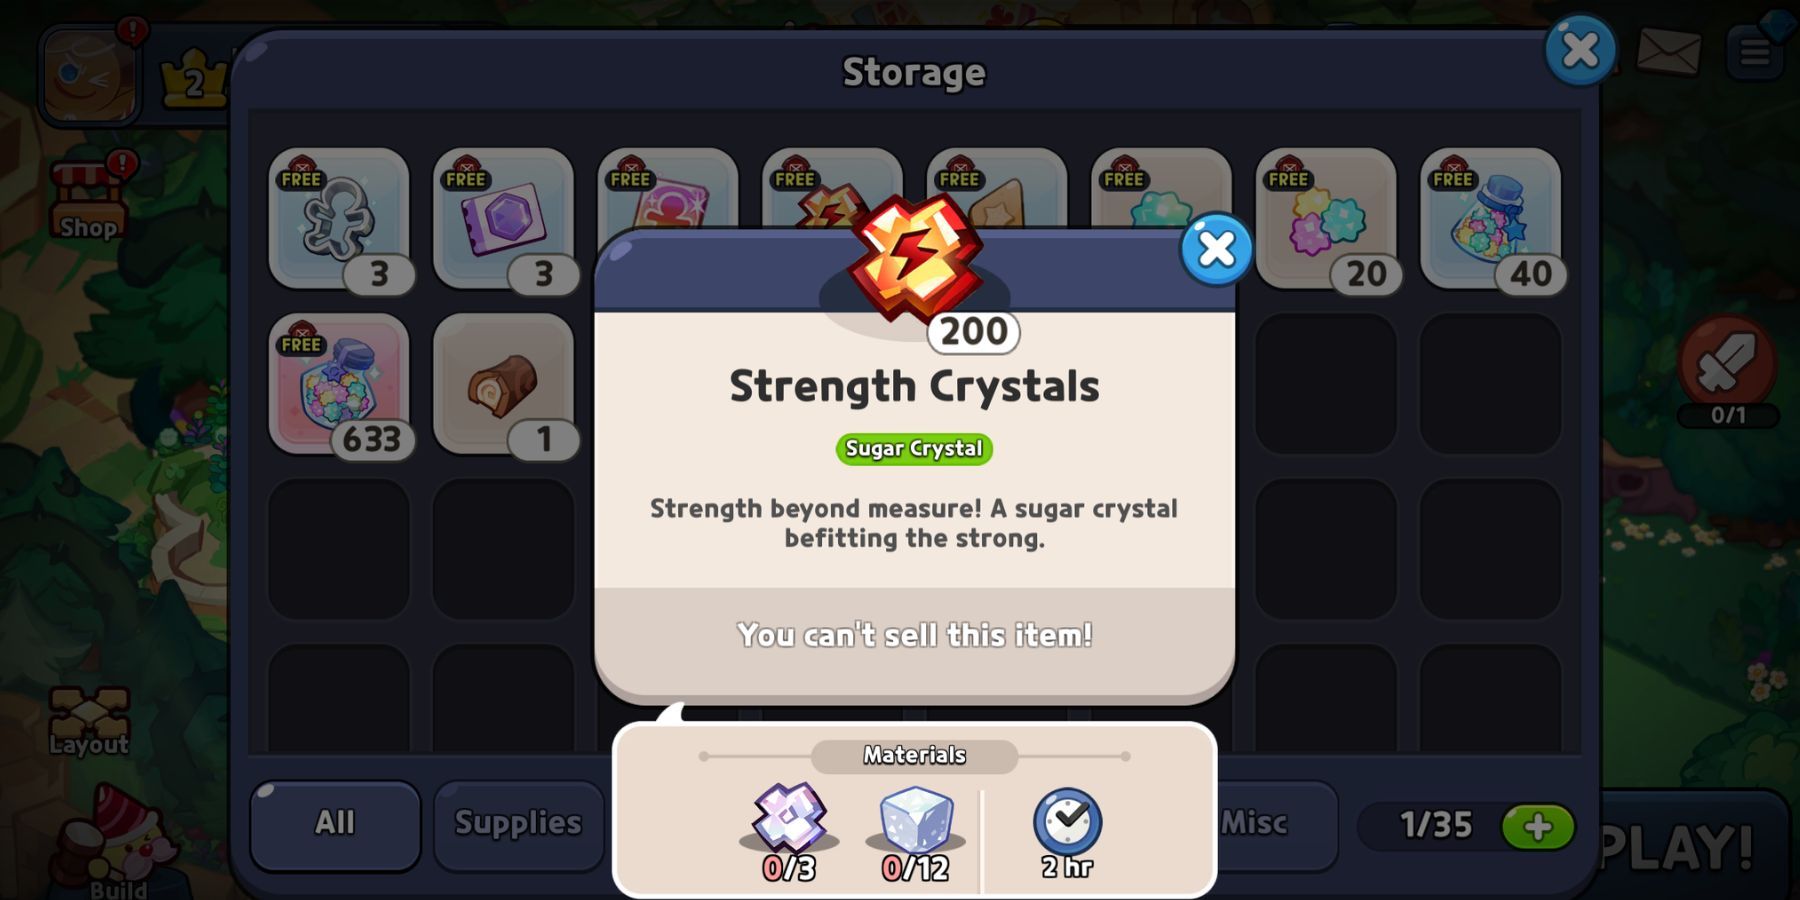 Strength Crystals